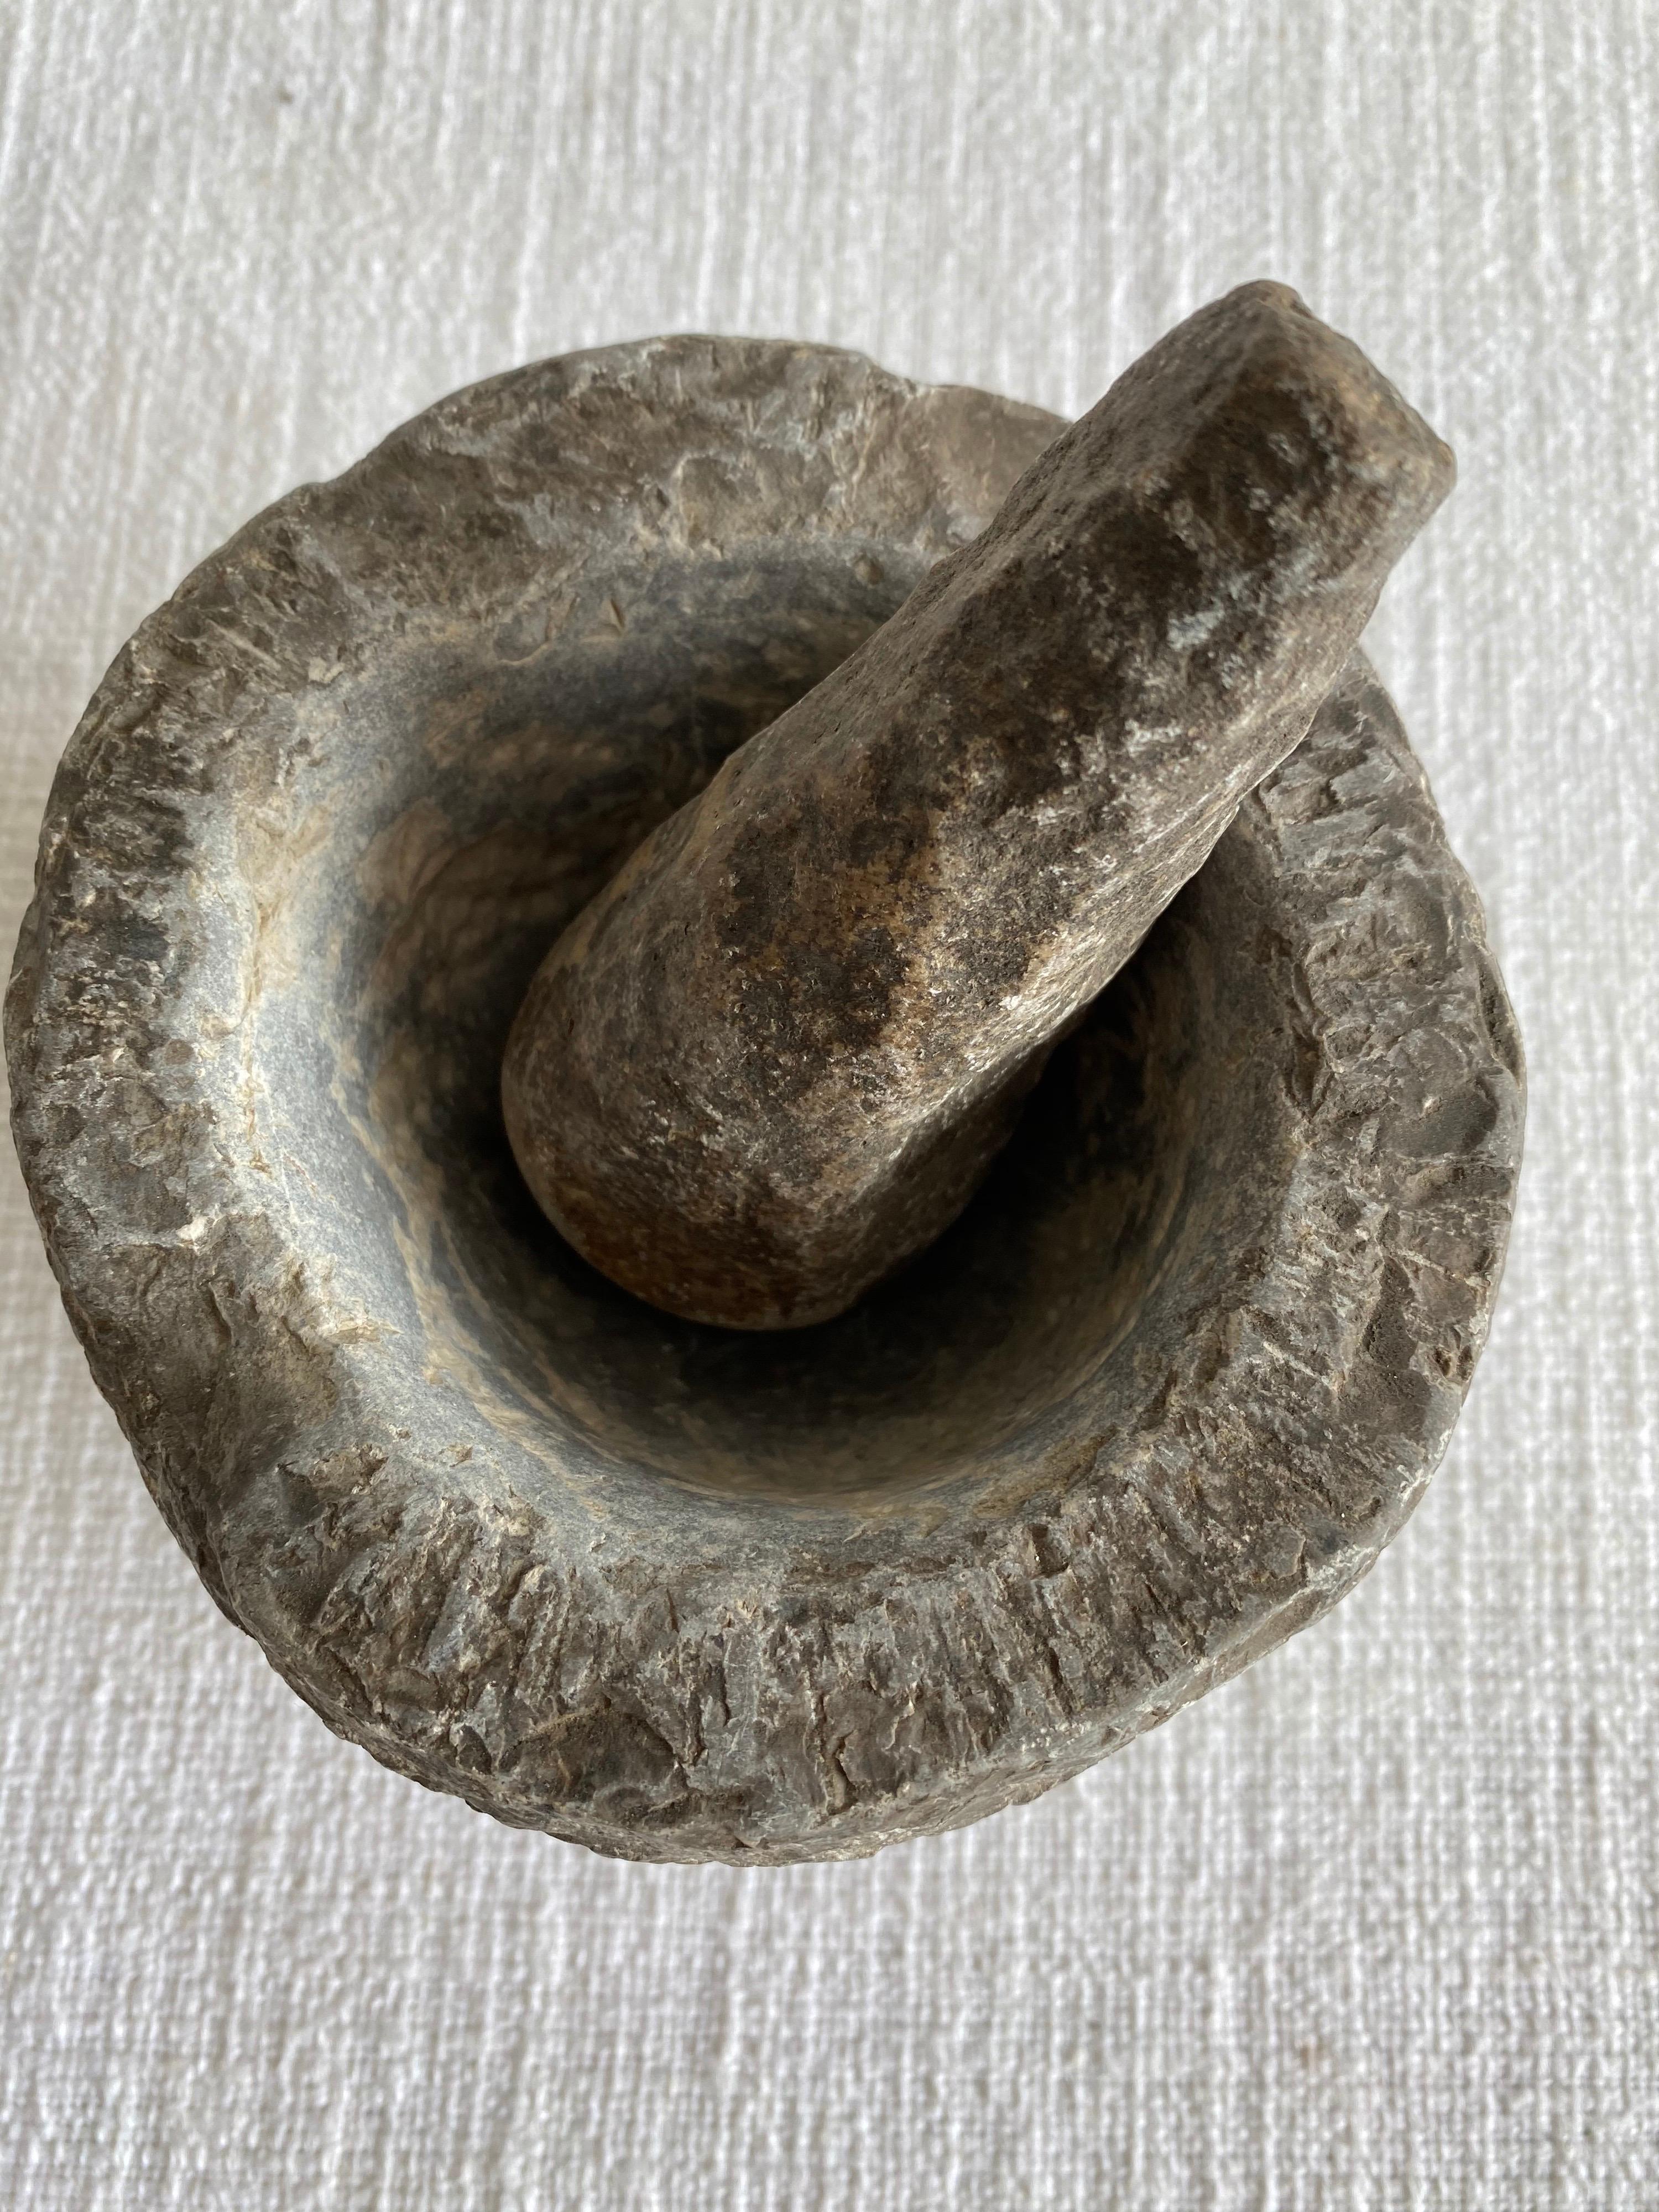 Antique stone mortar and pestle set, solid heavy stone, use as decoration, or for everyday use.
Size: 5.5”D x 5”
Weight: 10lbs.